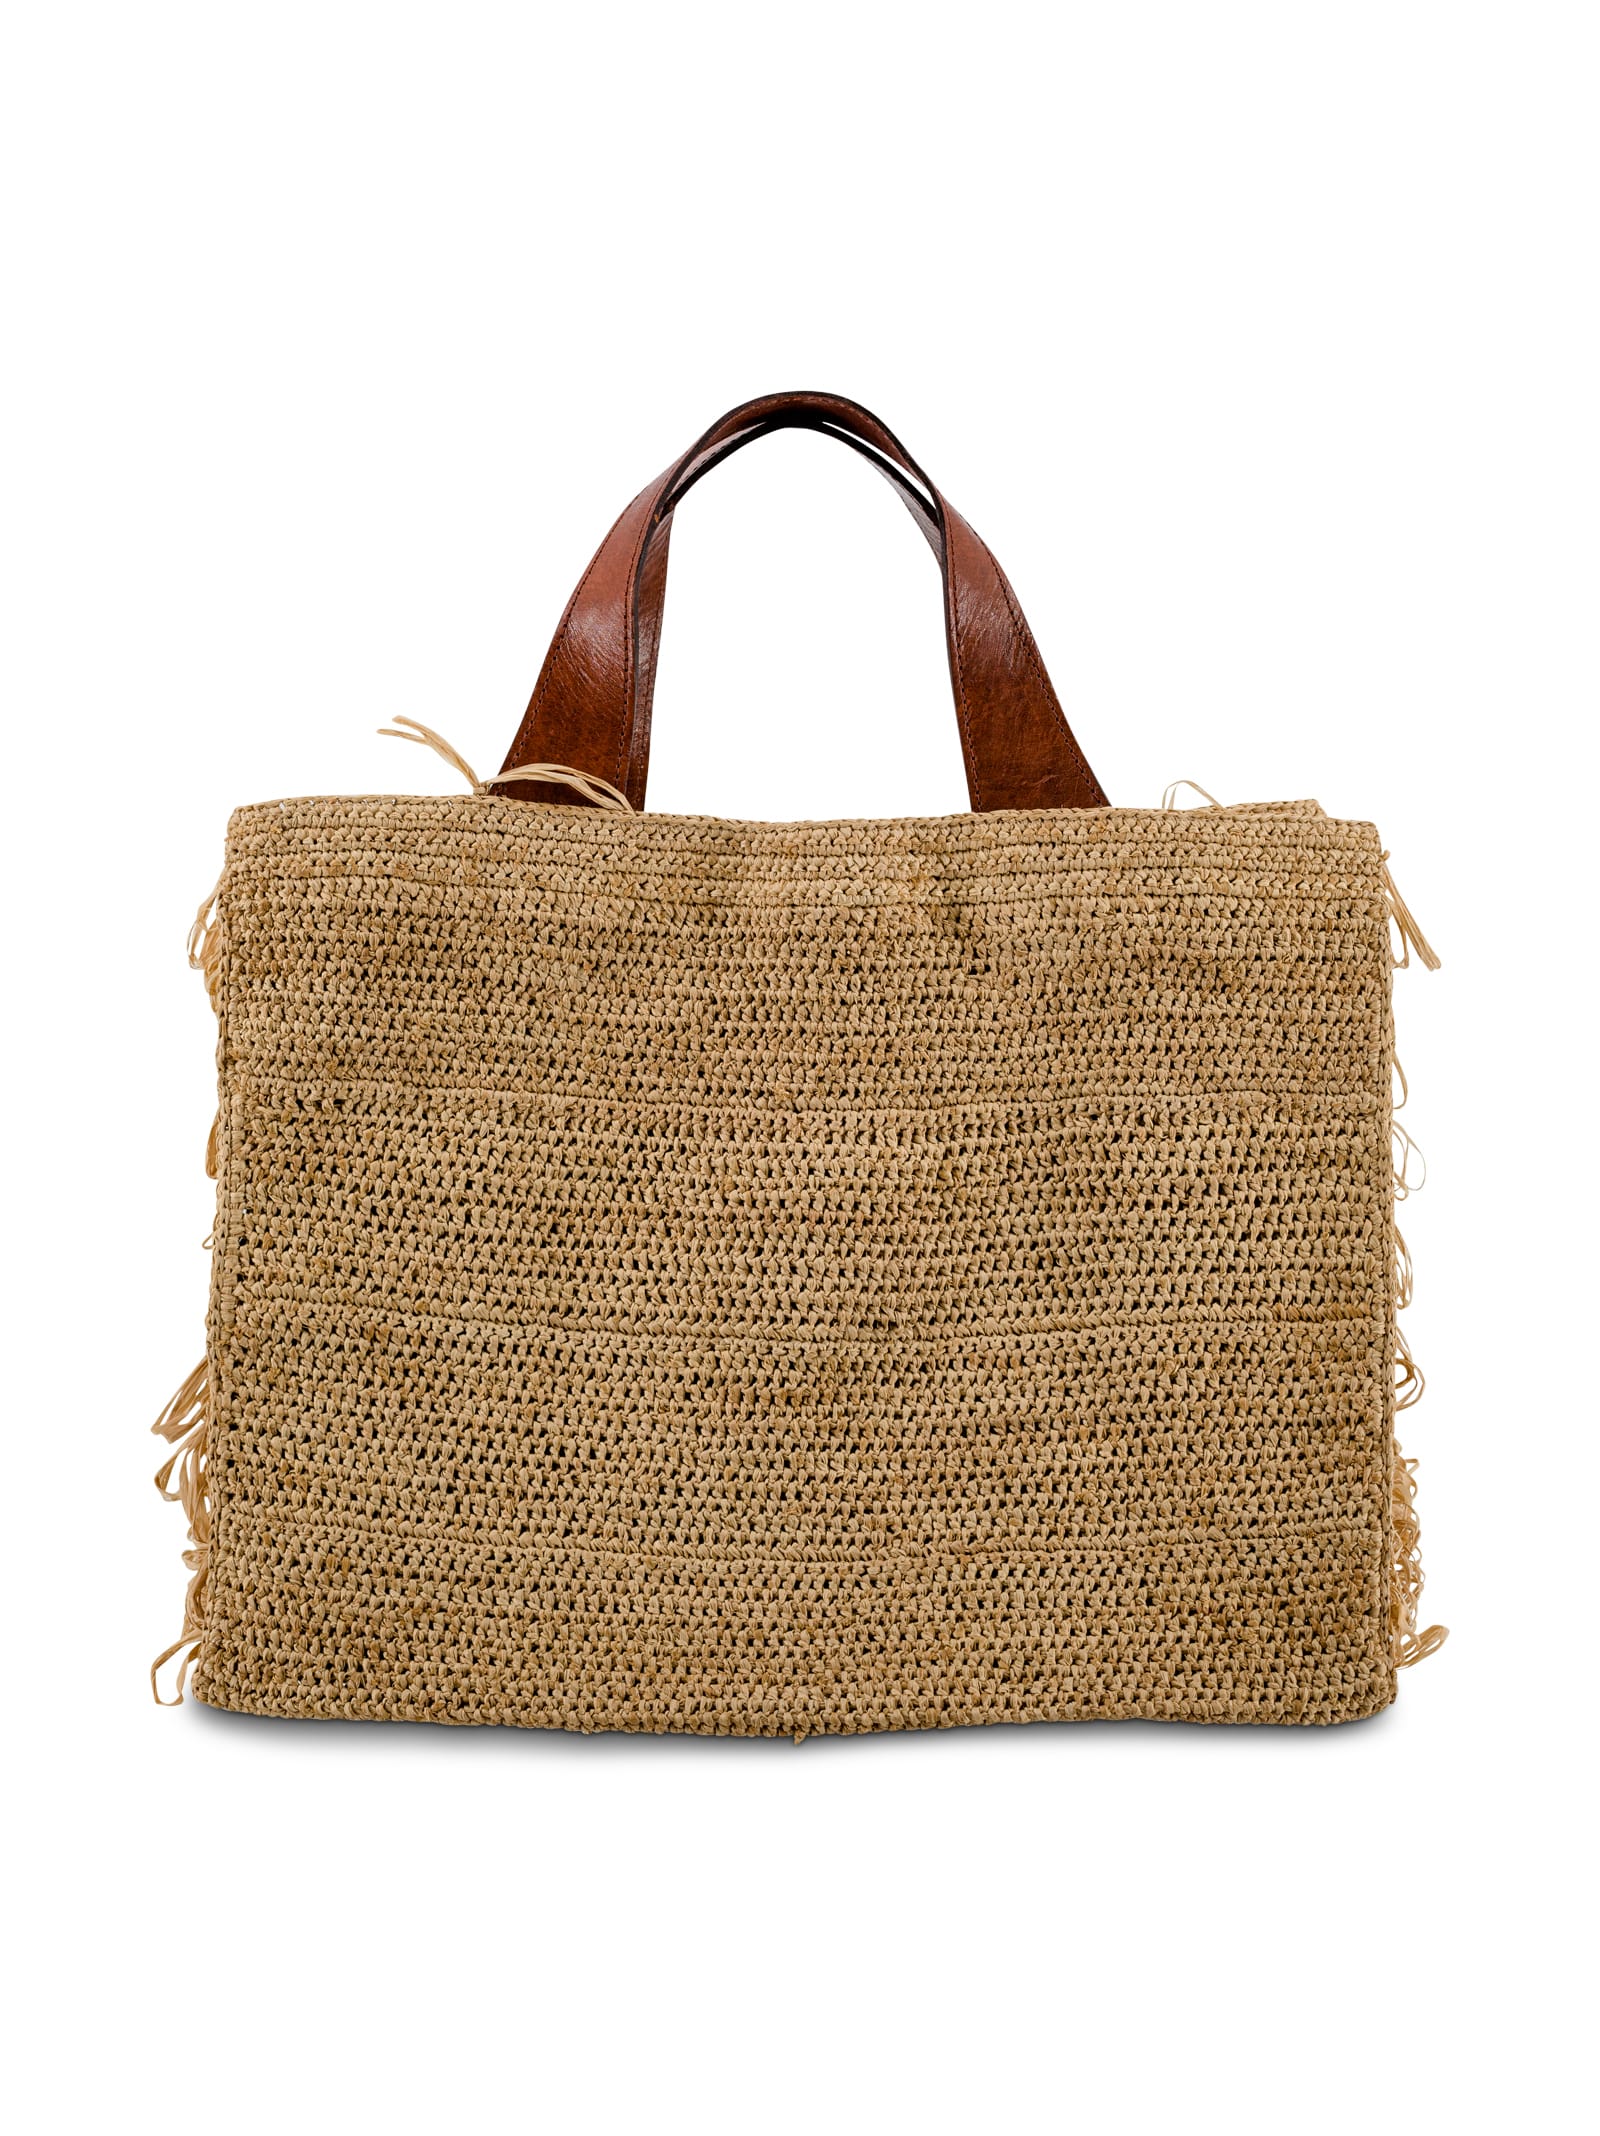 Onja Woven Fringed Tote Bag